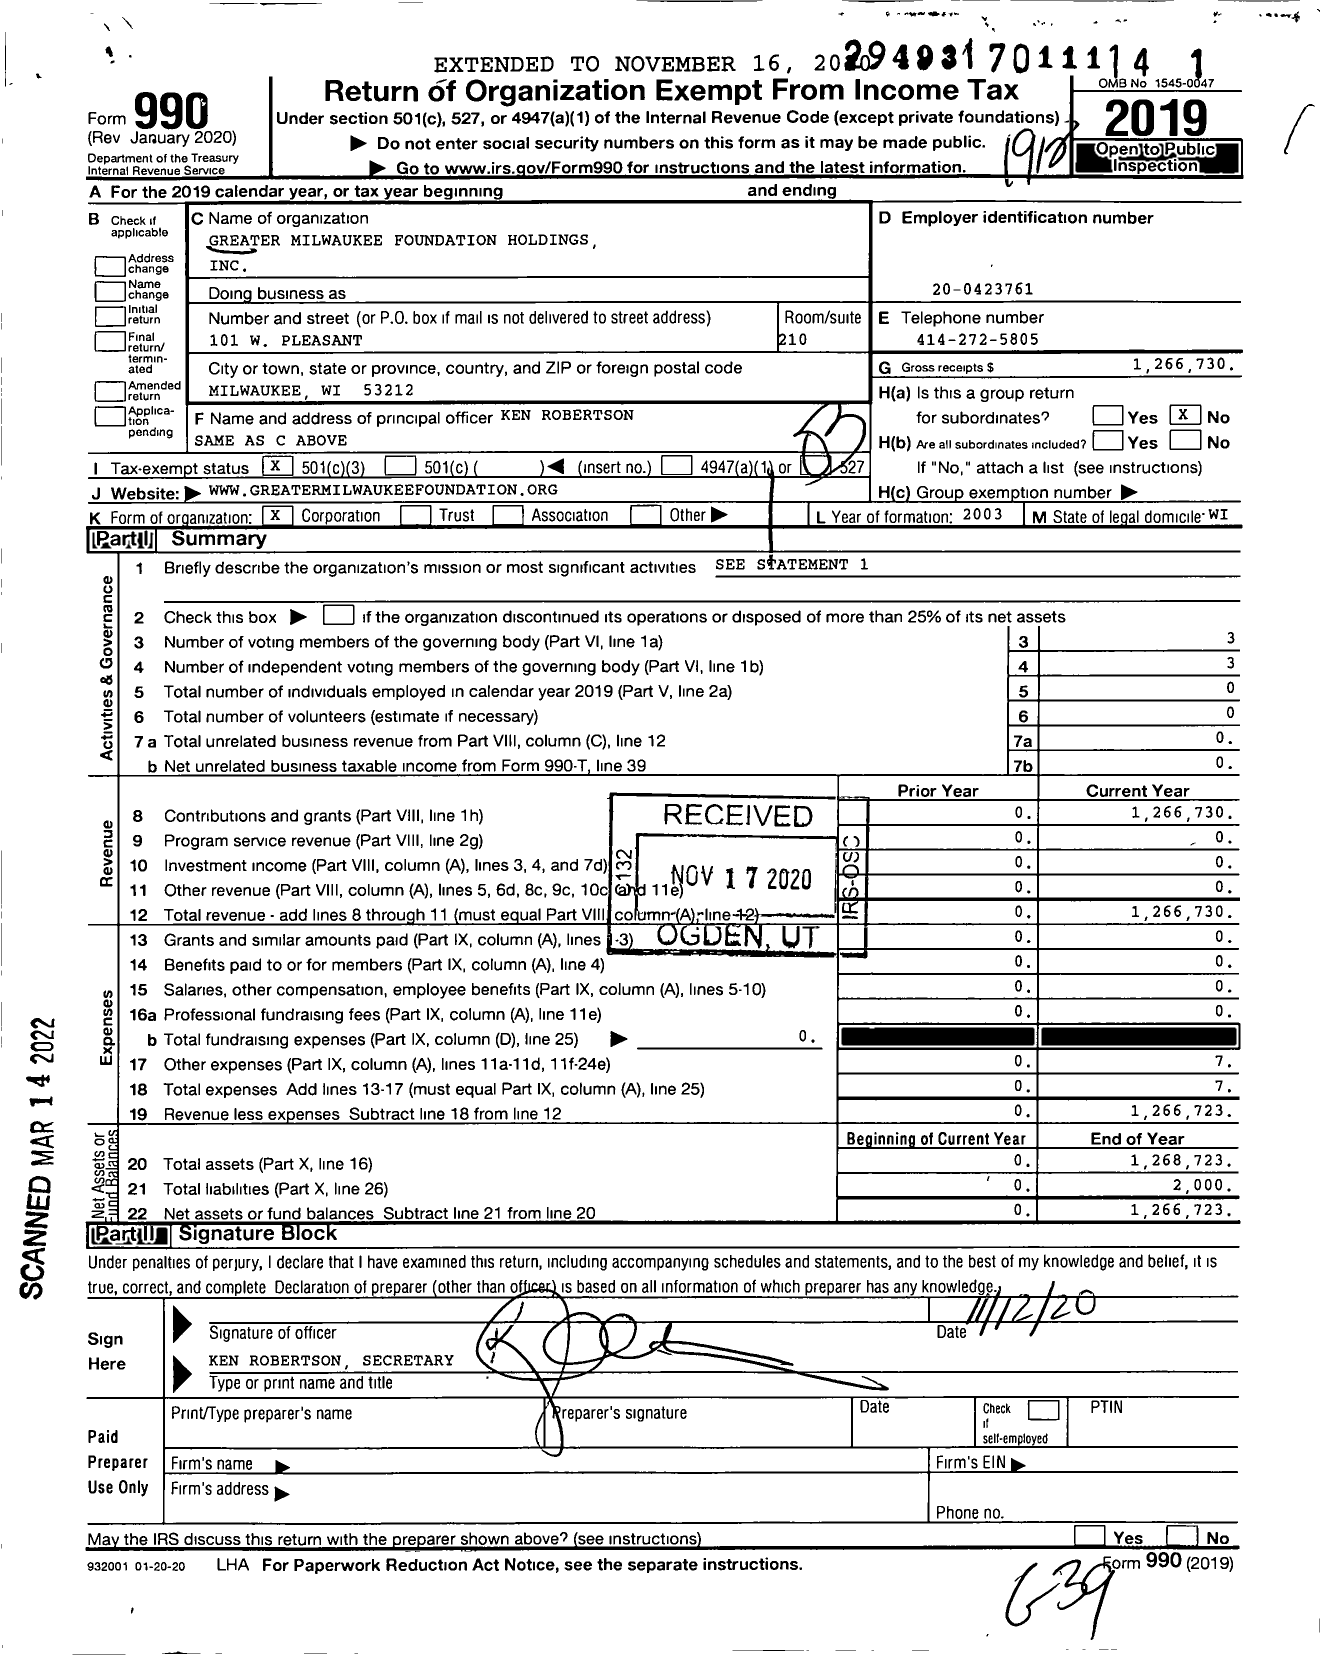 Image of first page of 2019 Form 990 for Greater Milwaukee Foundation Holdings